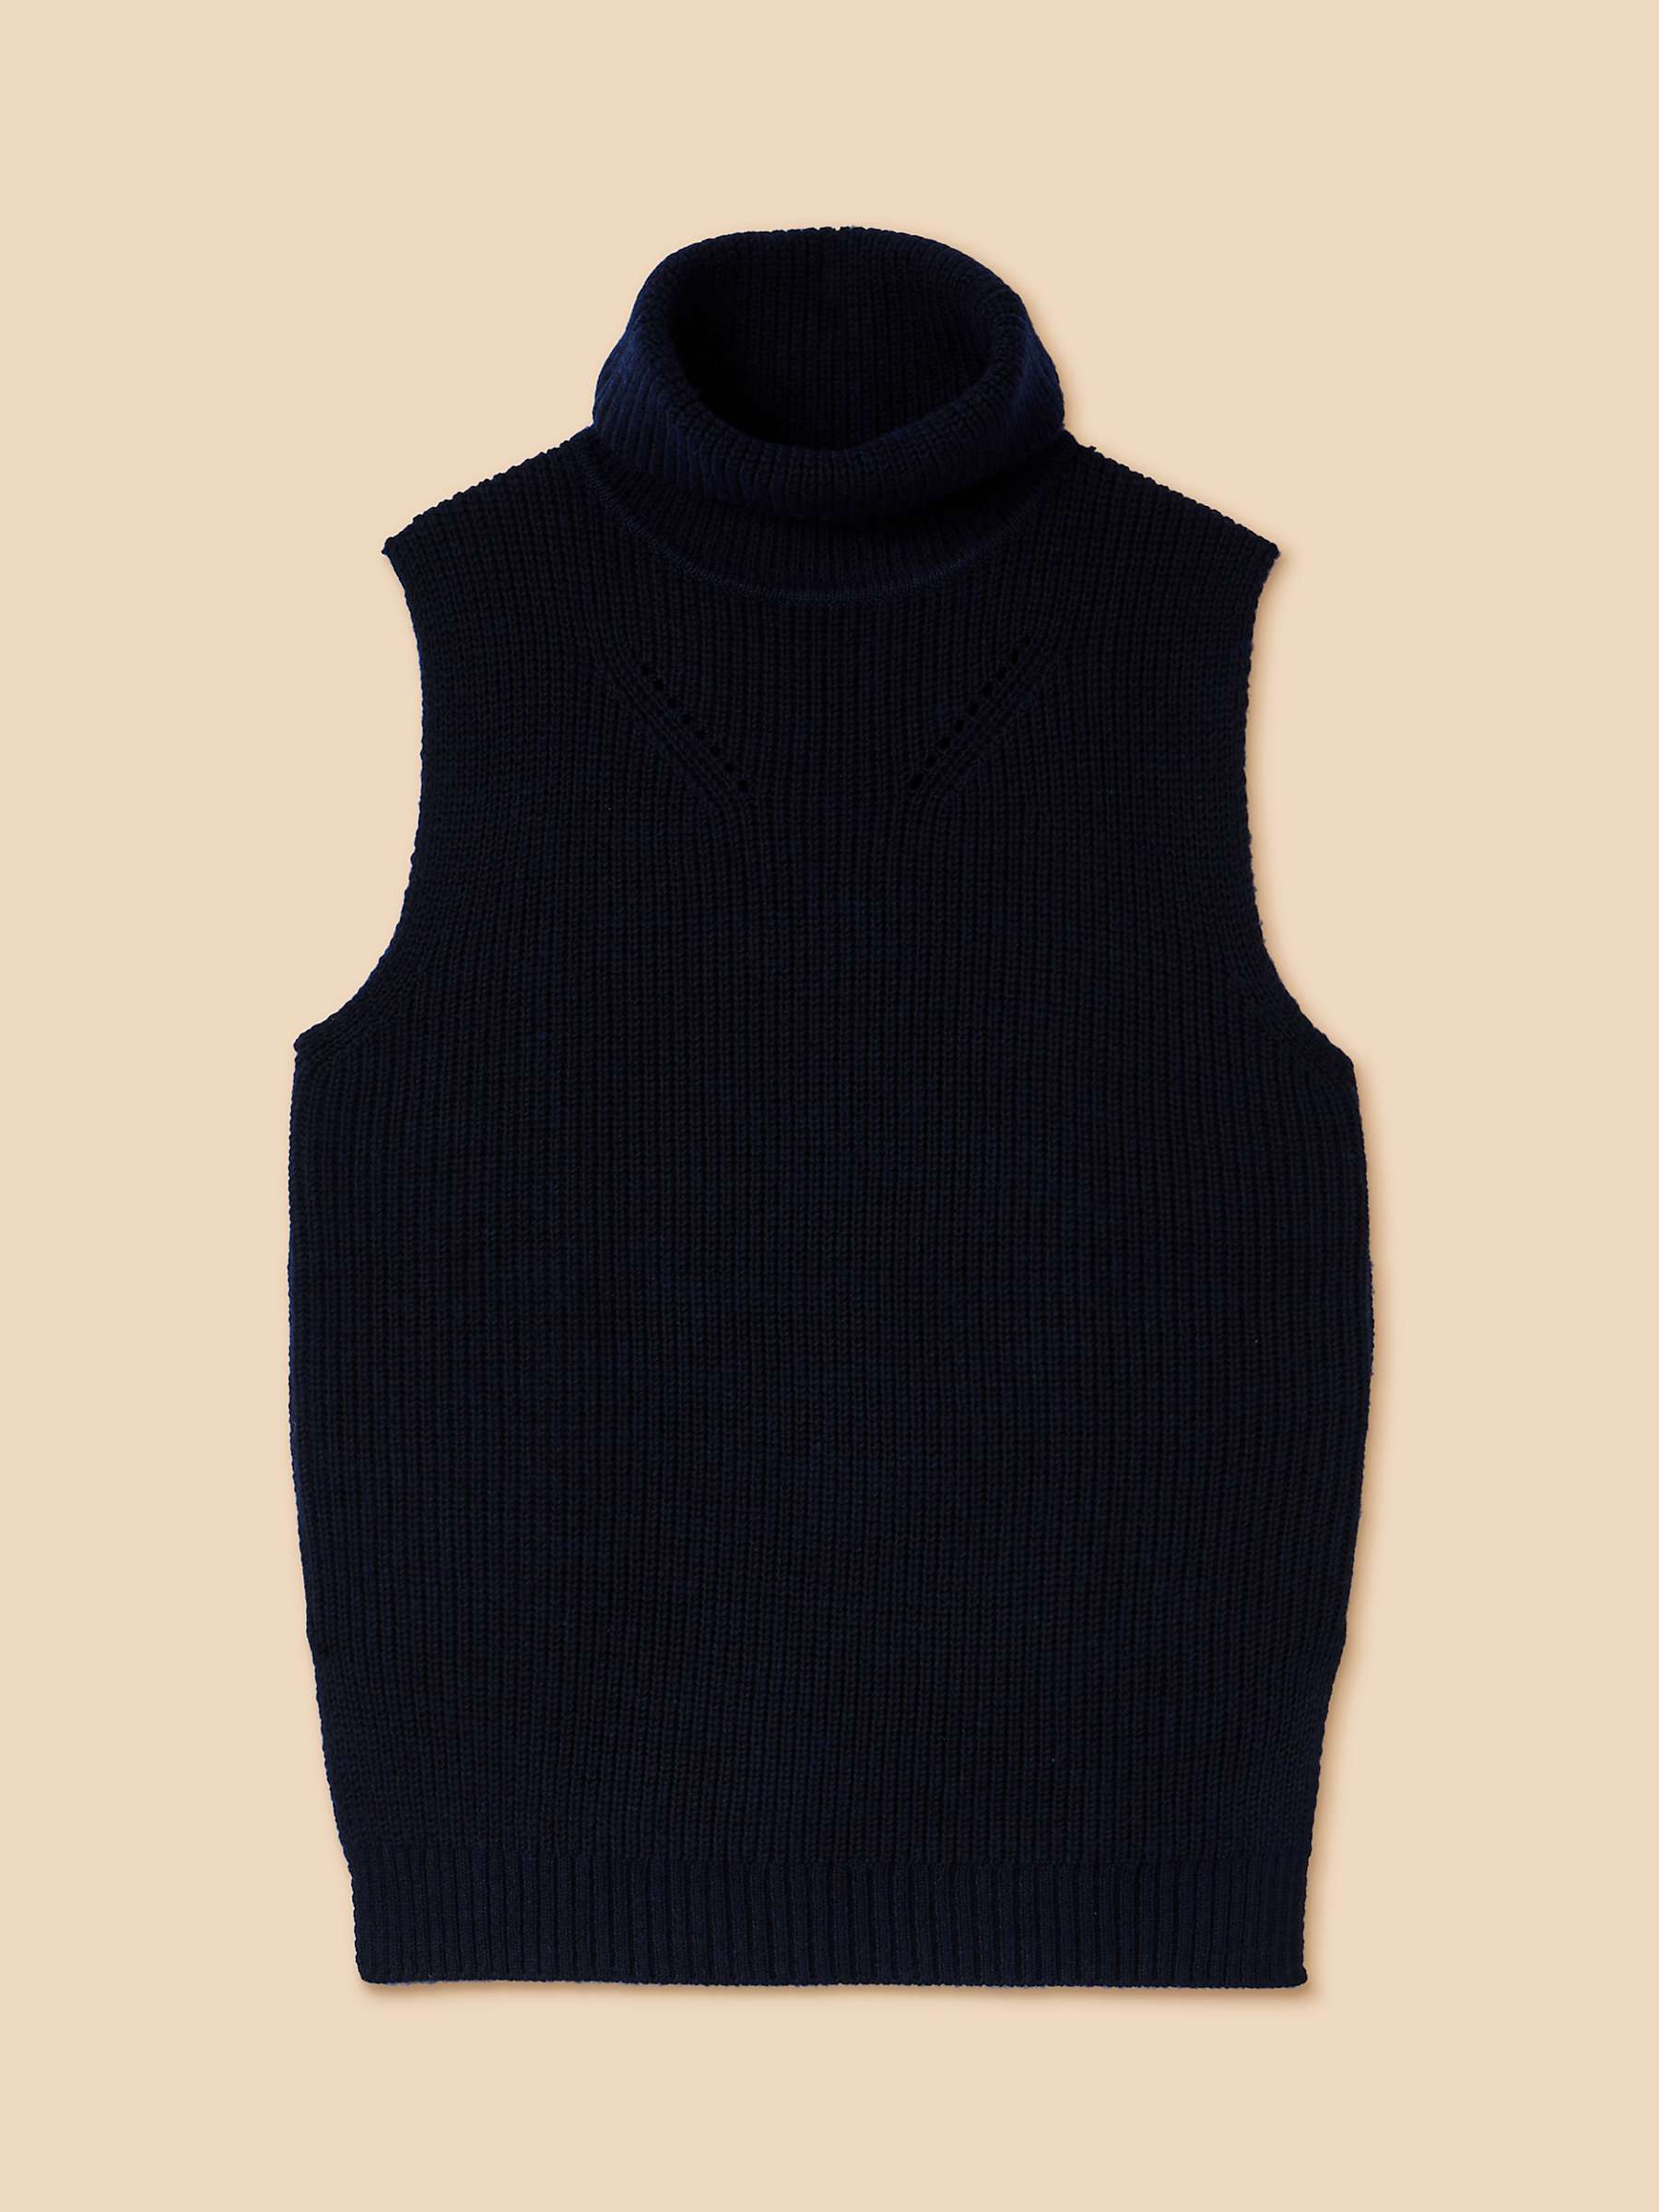 Buy White Stuff Trixie High Neck Tabard, Navy Online at johnlewis.com